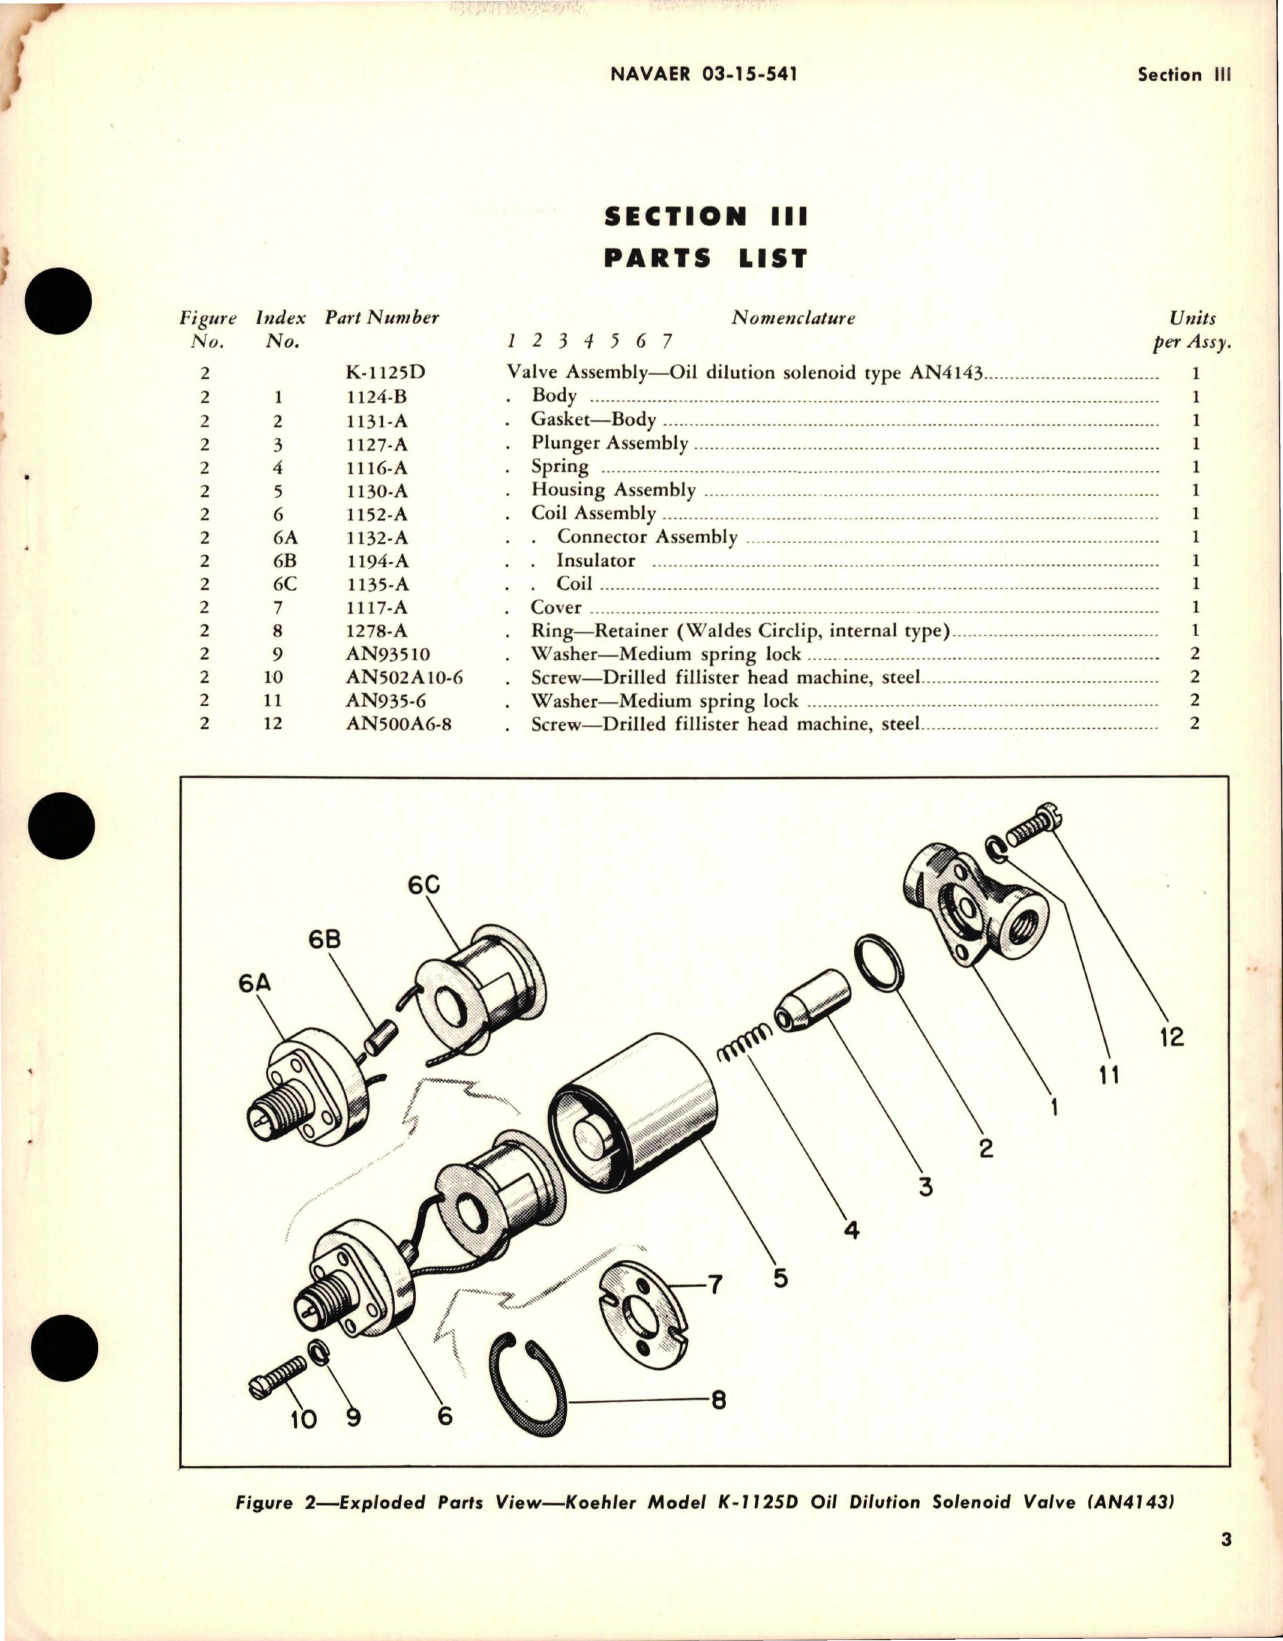 Sample page 5 from AirCorps Library document: Operation, Service, Overhaul Instructions w Parts for Oil Dilution Solenoid Valve - K-1125D